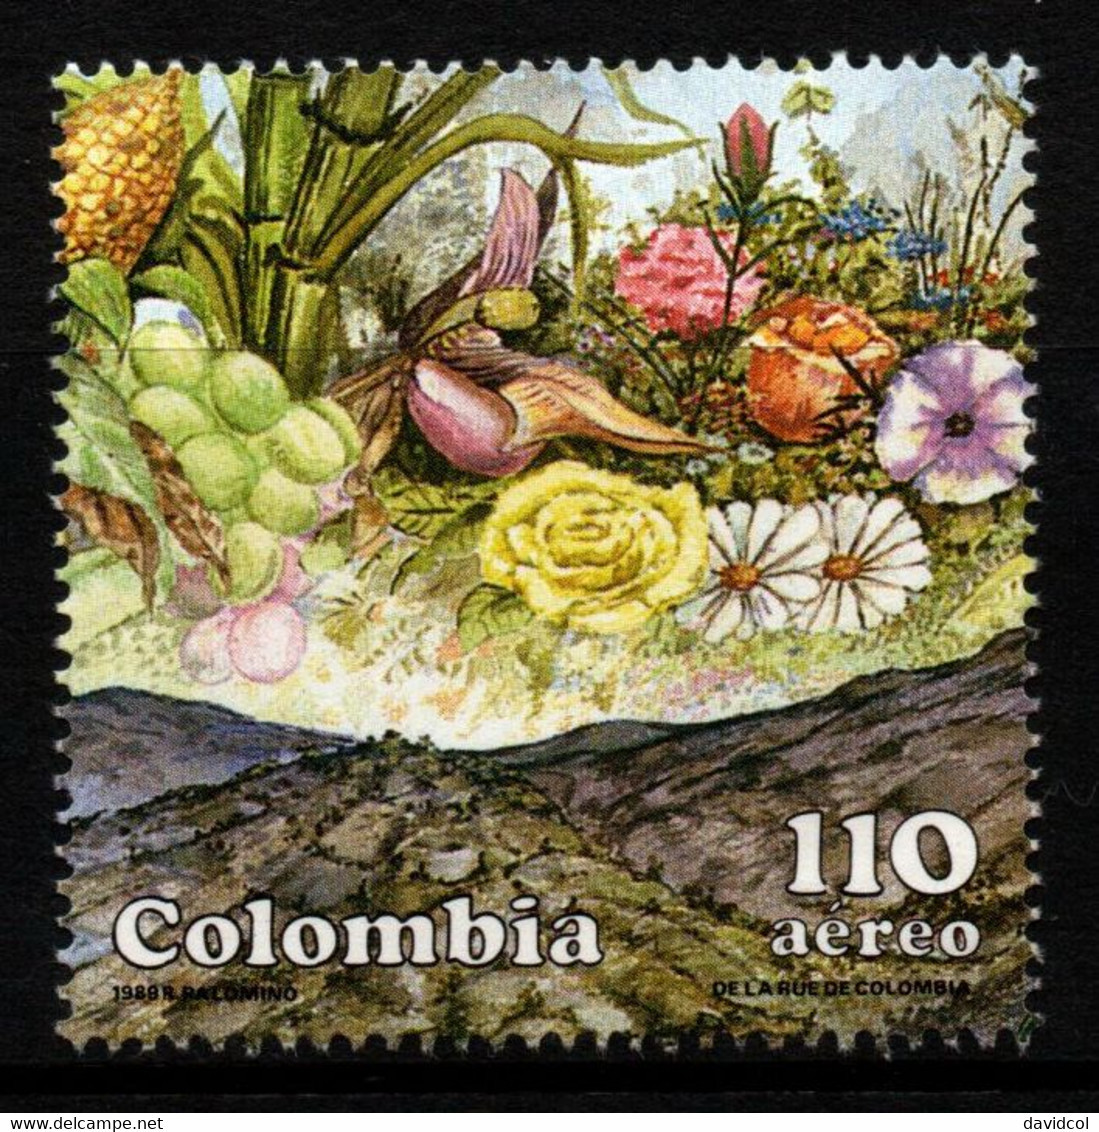 09B- KOLUMBIEN - 1989 - MI#:1754 - MNH- FLOWERS - NATURAL RICHES OF COLOMBIA. - Colombia